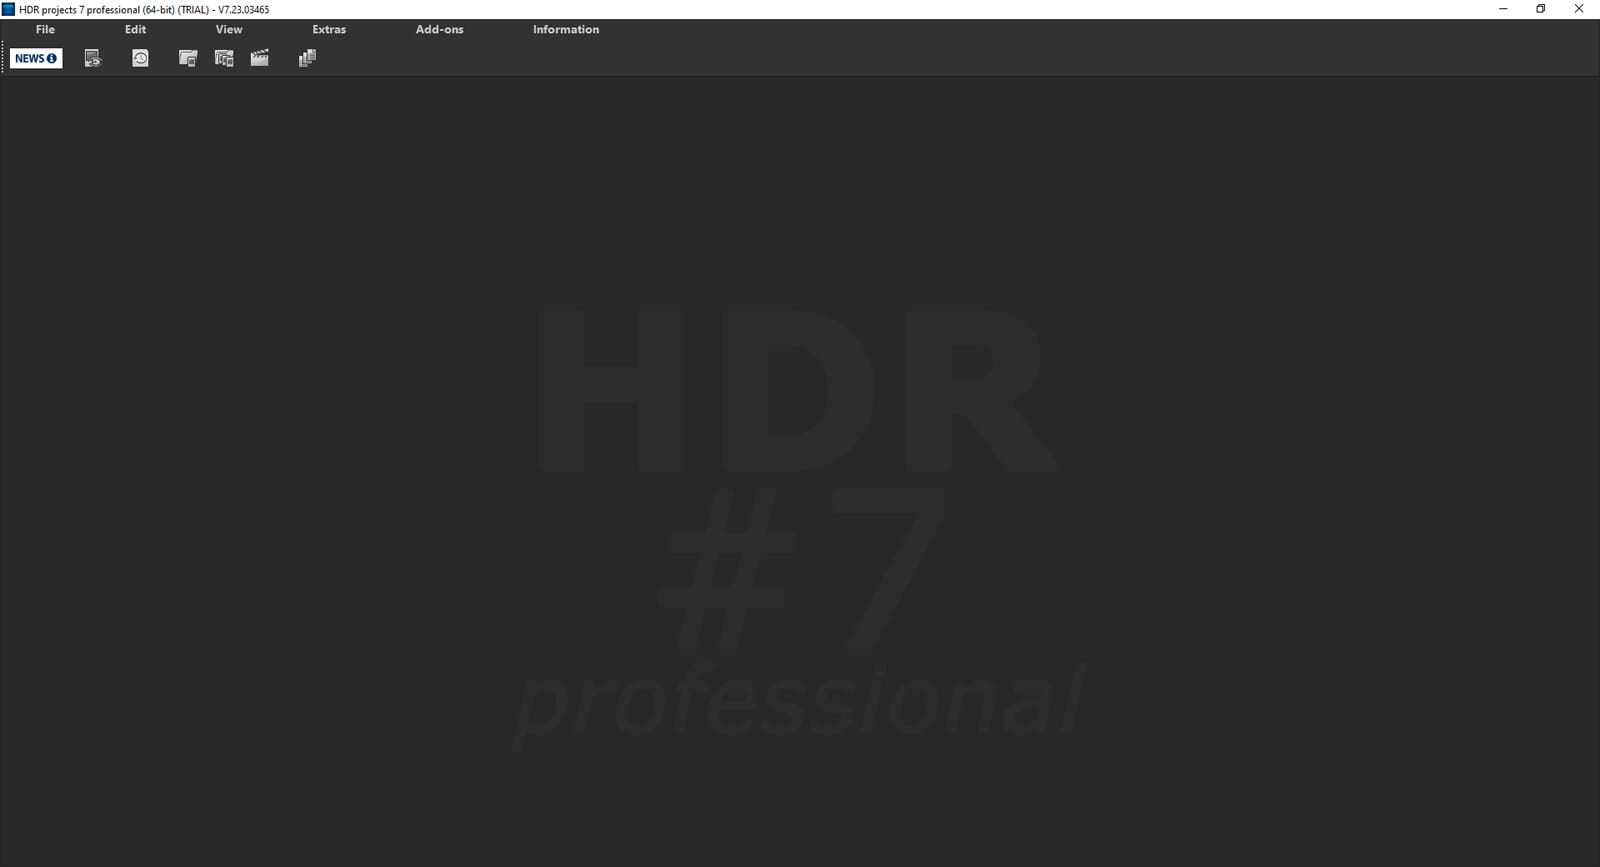 hdr projects 5 download